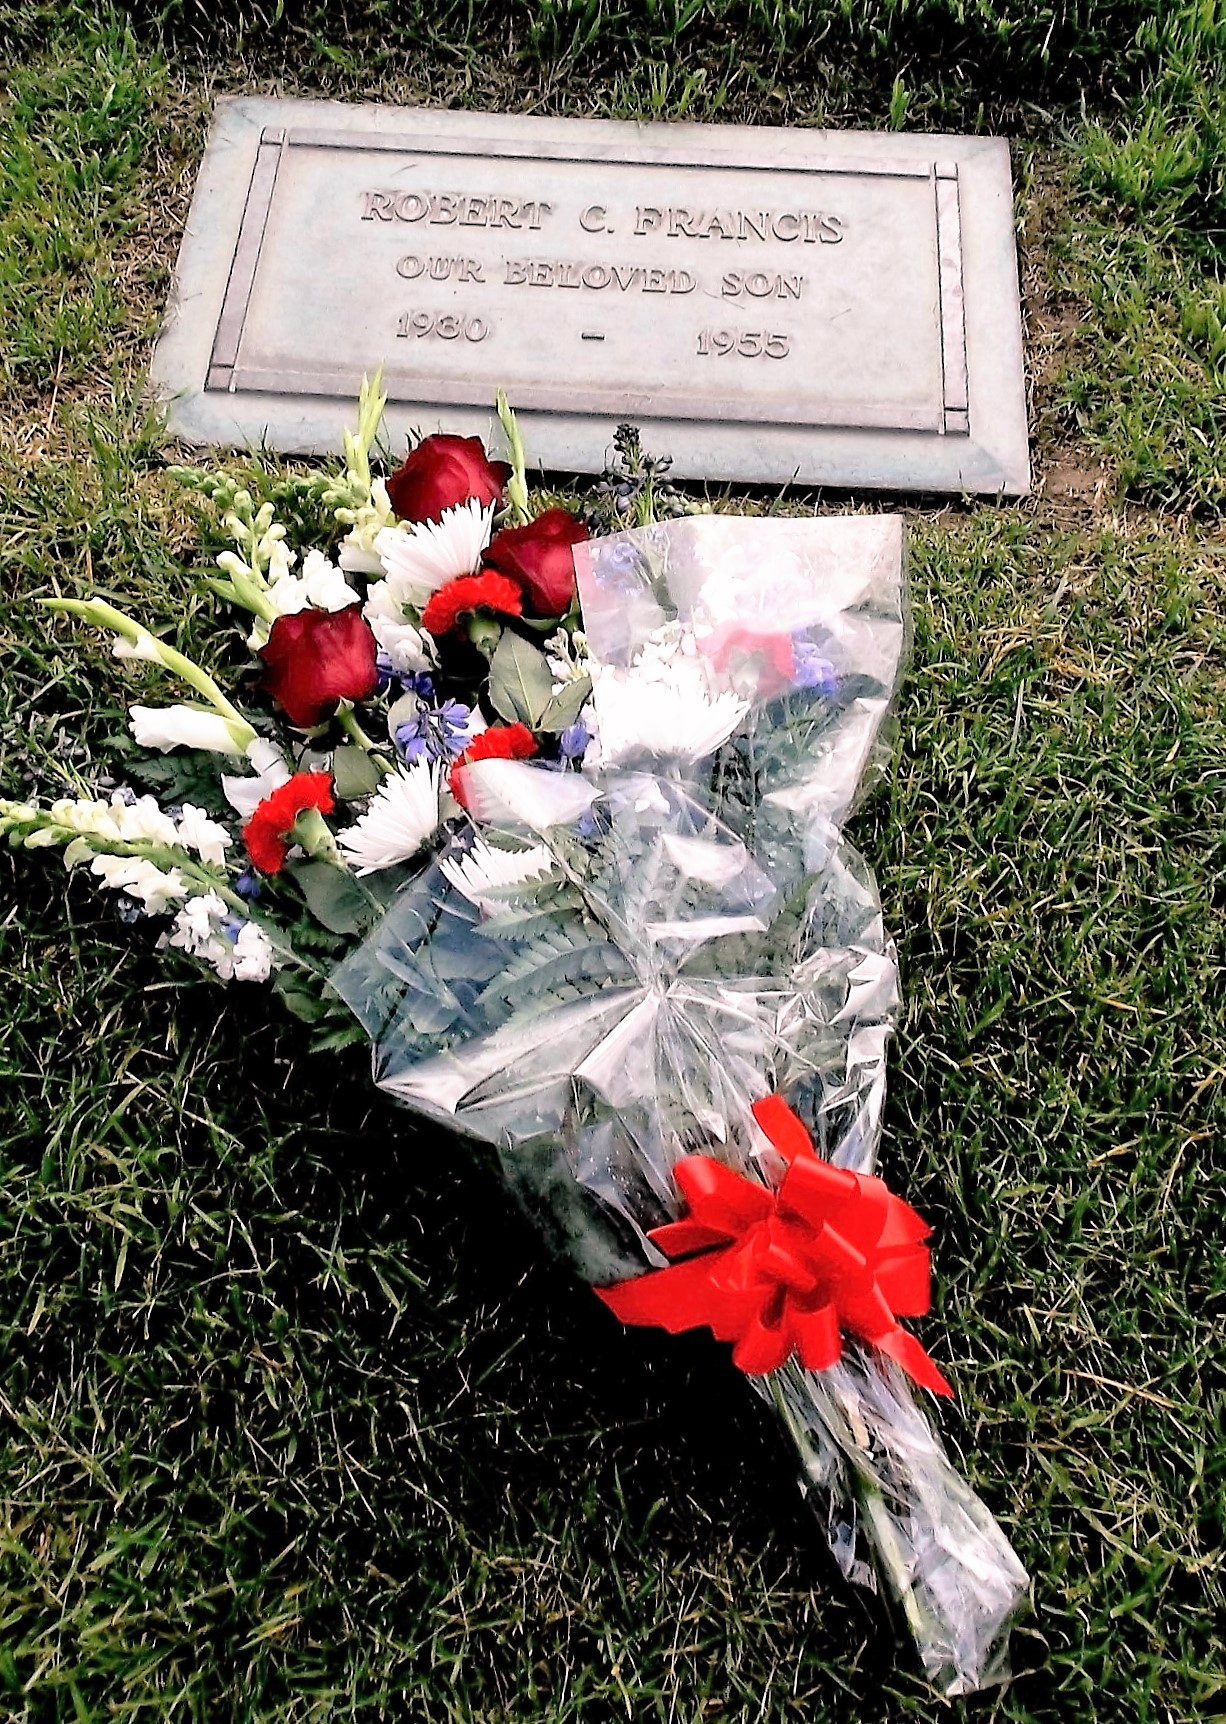  Bob is remembered and continues to receive tributes from fans at his grave and on the Find a Grave website. 